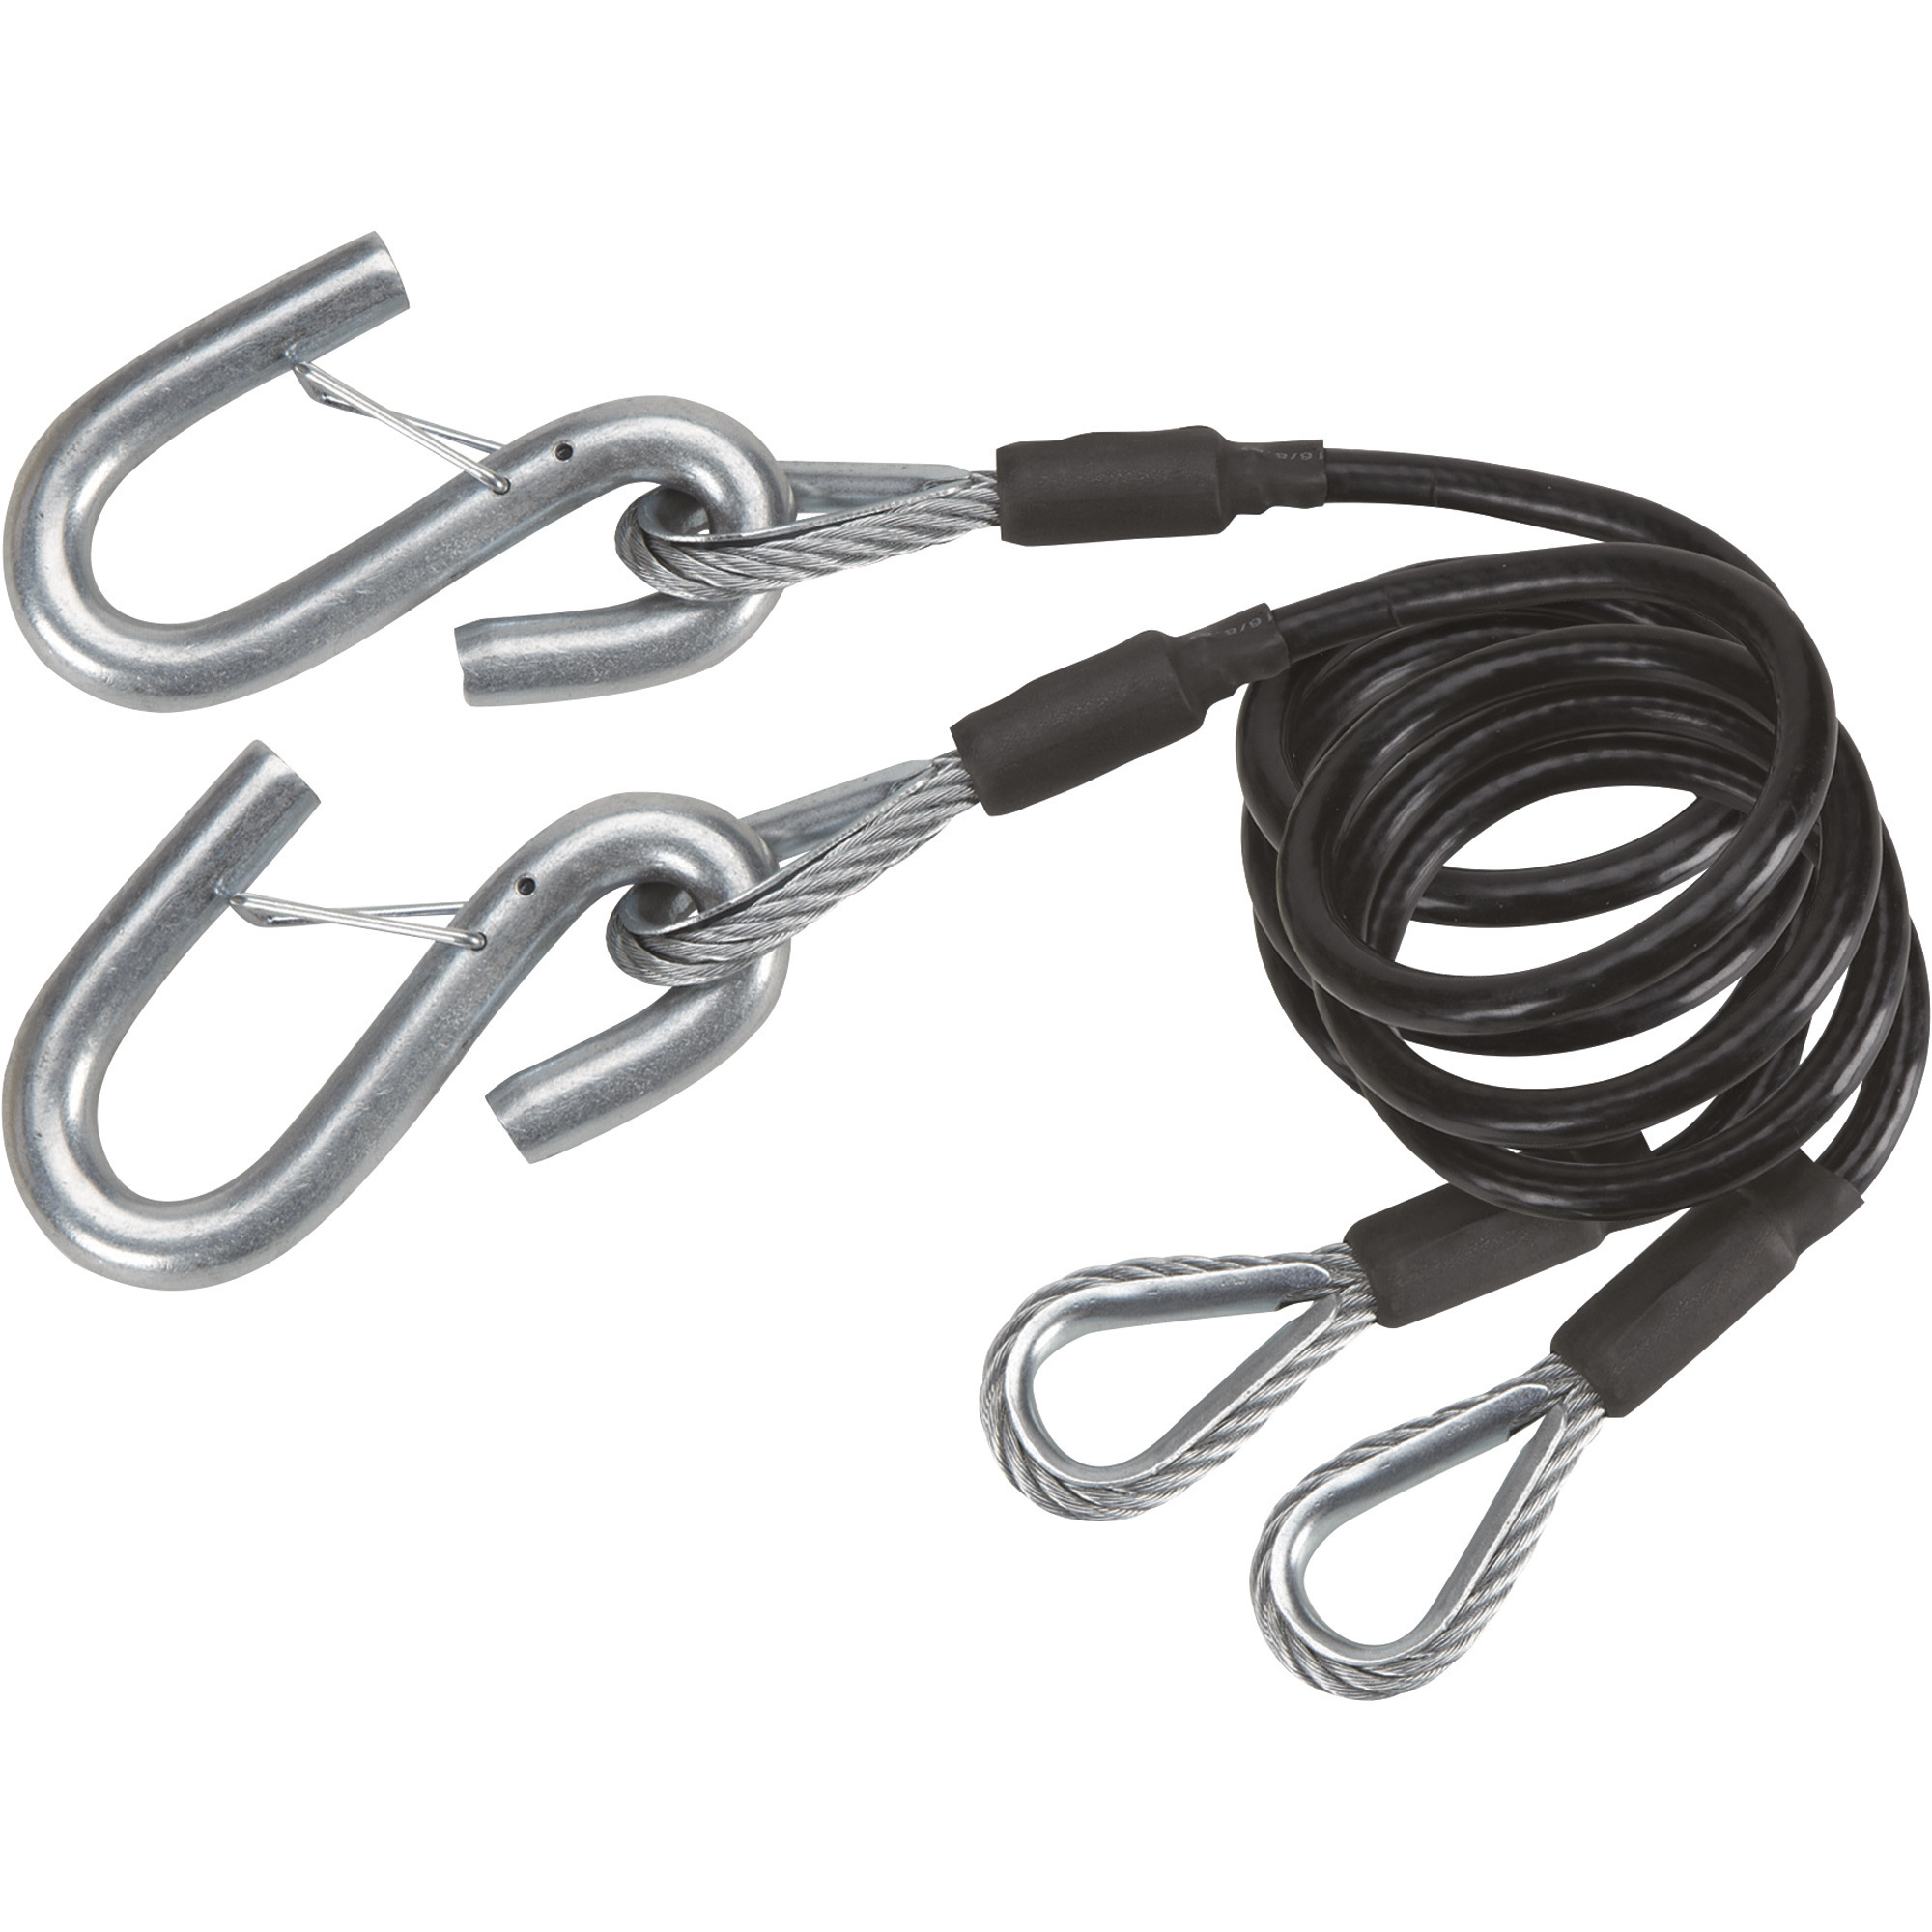 Ultra-Tow Safety Tow Cables with Safety Hooks, 2-Pack